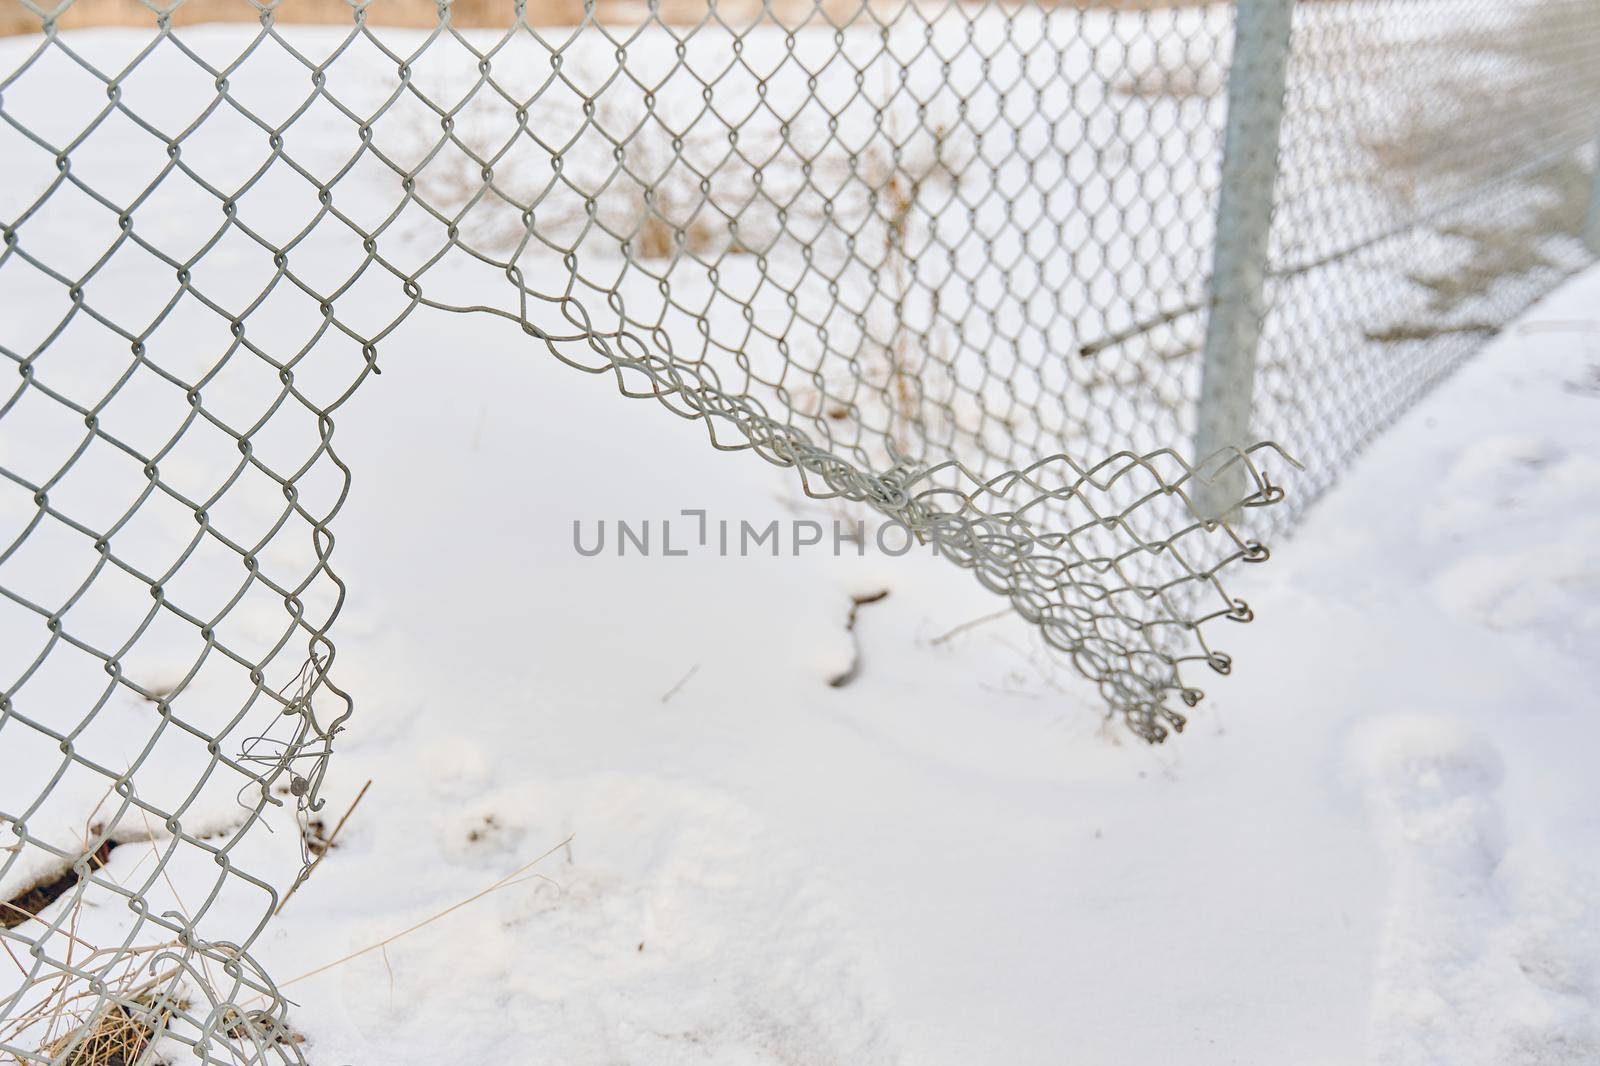 Hole in wire border fence. Maximum security detention facility. Illegal trespassing. Escape from prison or closed institution for mentally ill. Winter snowy weather. Unauthorized entry is prohibited.